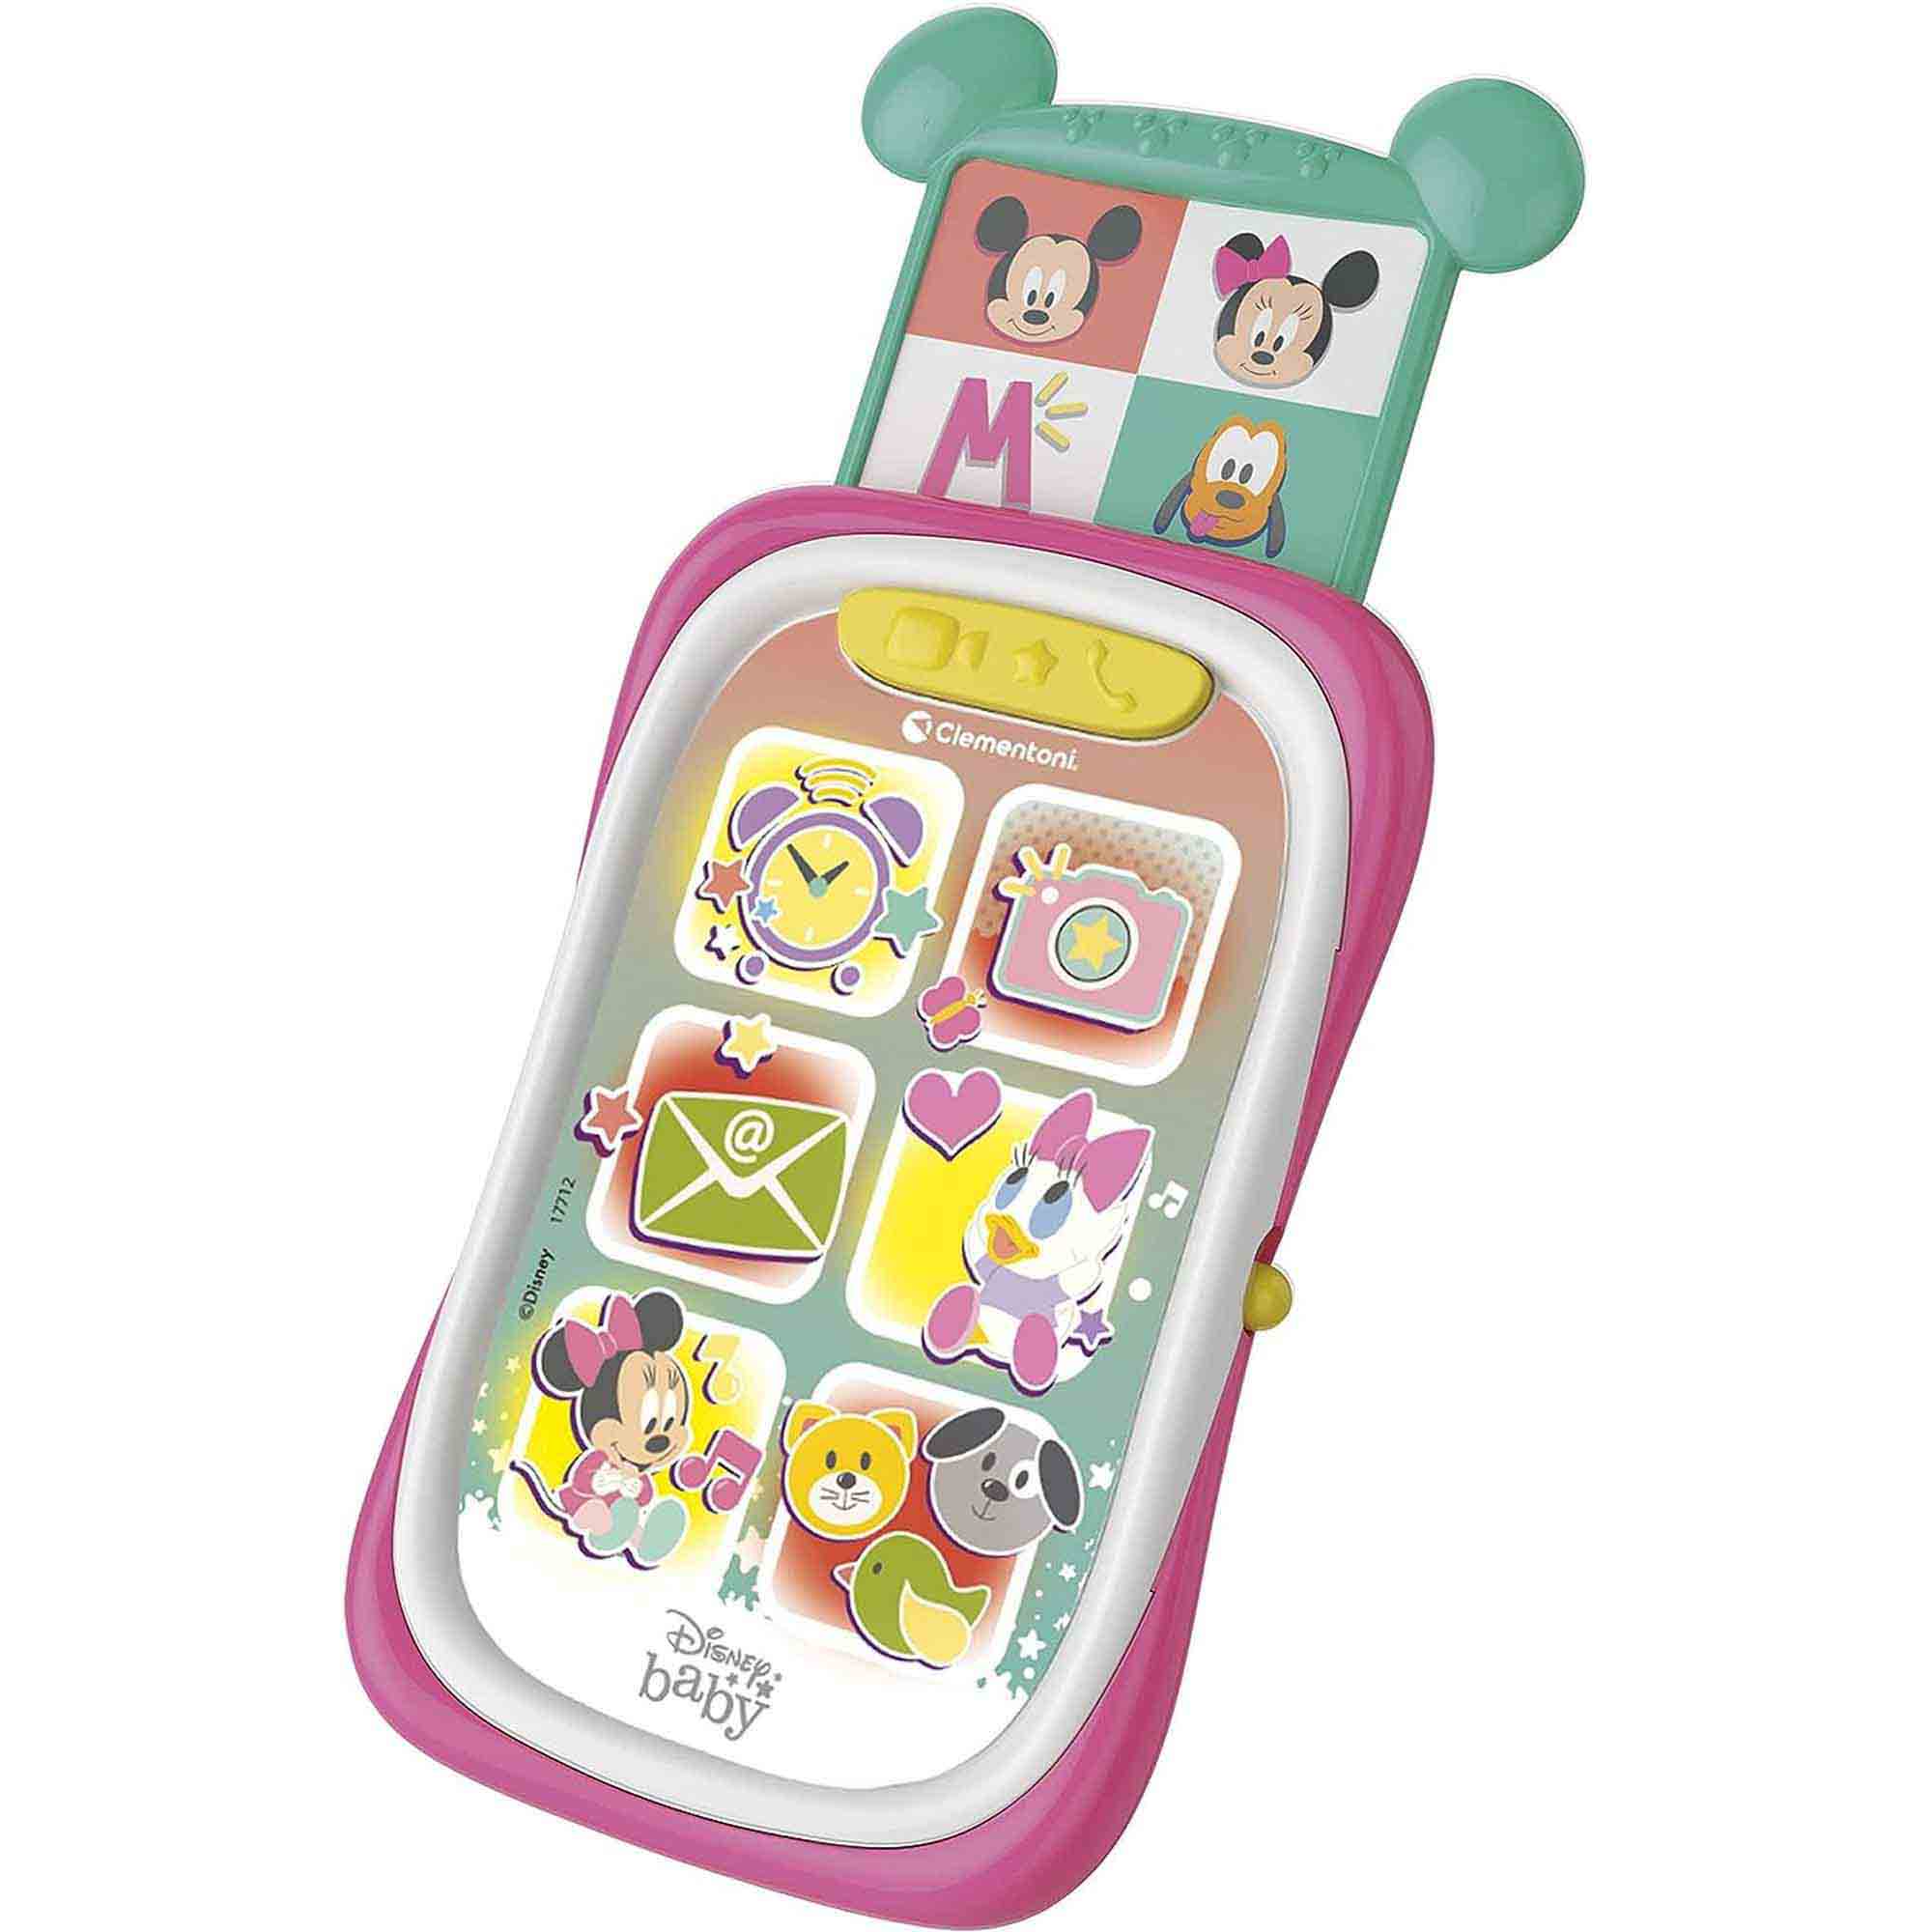 Smartphone interactiv Minnie Mouse, Baby, 9 - 36 luni, Clementoni